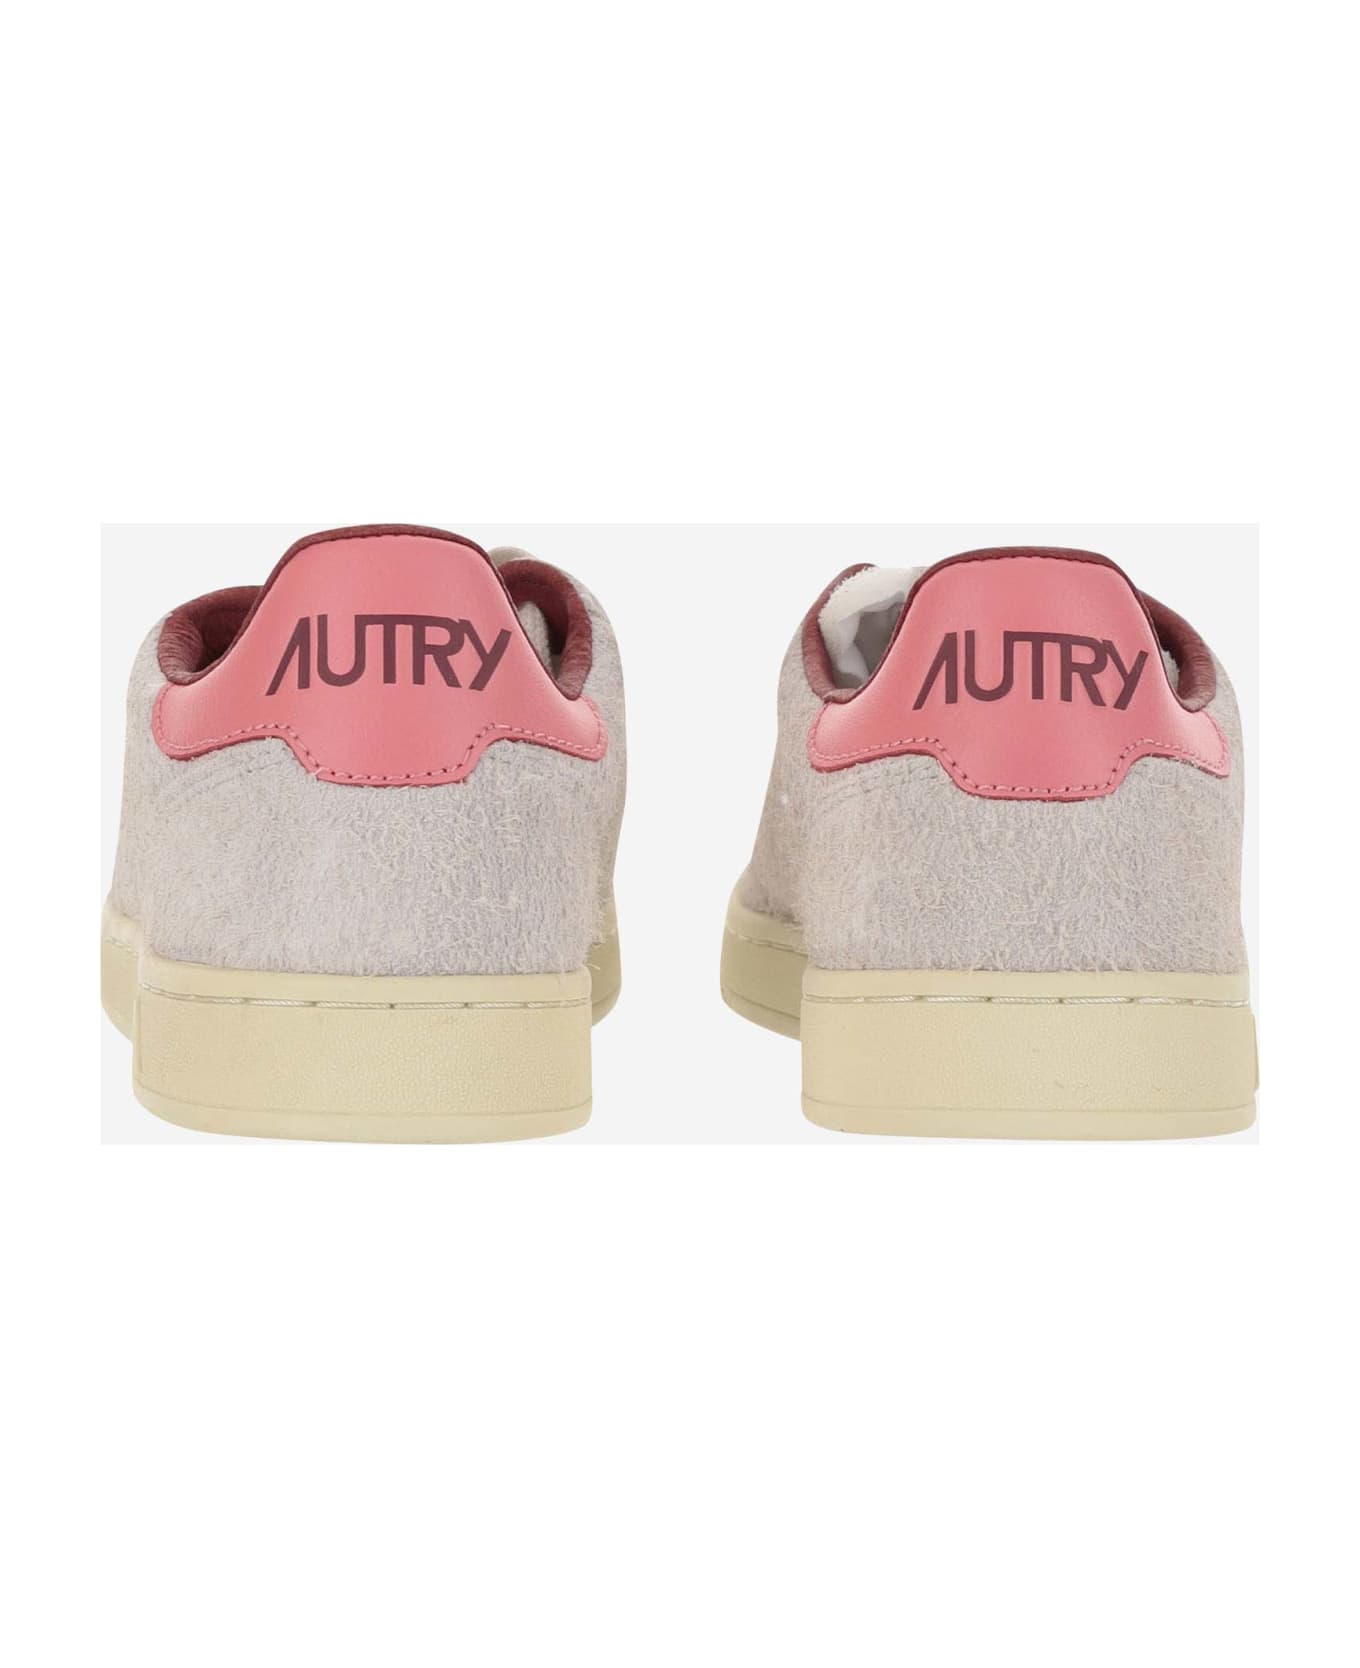 Autry Medalist Low Sneakers In Suede Hair Sand Effect - Grey スニーカー